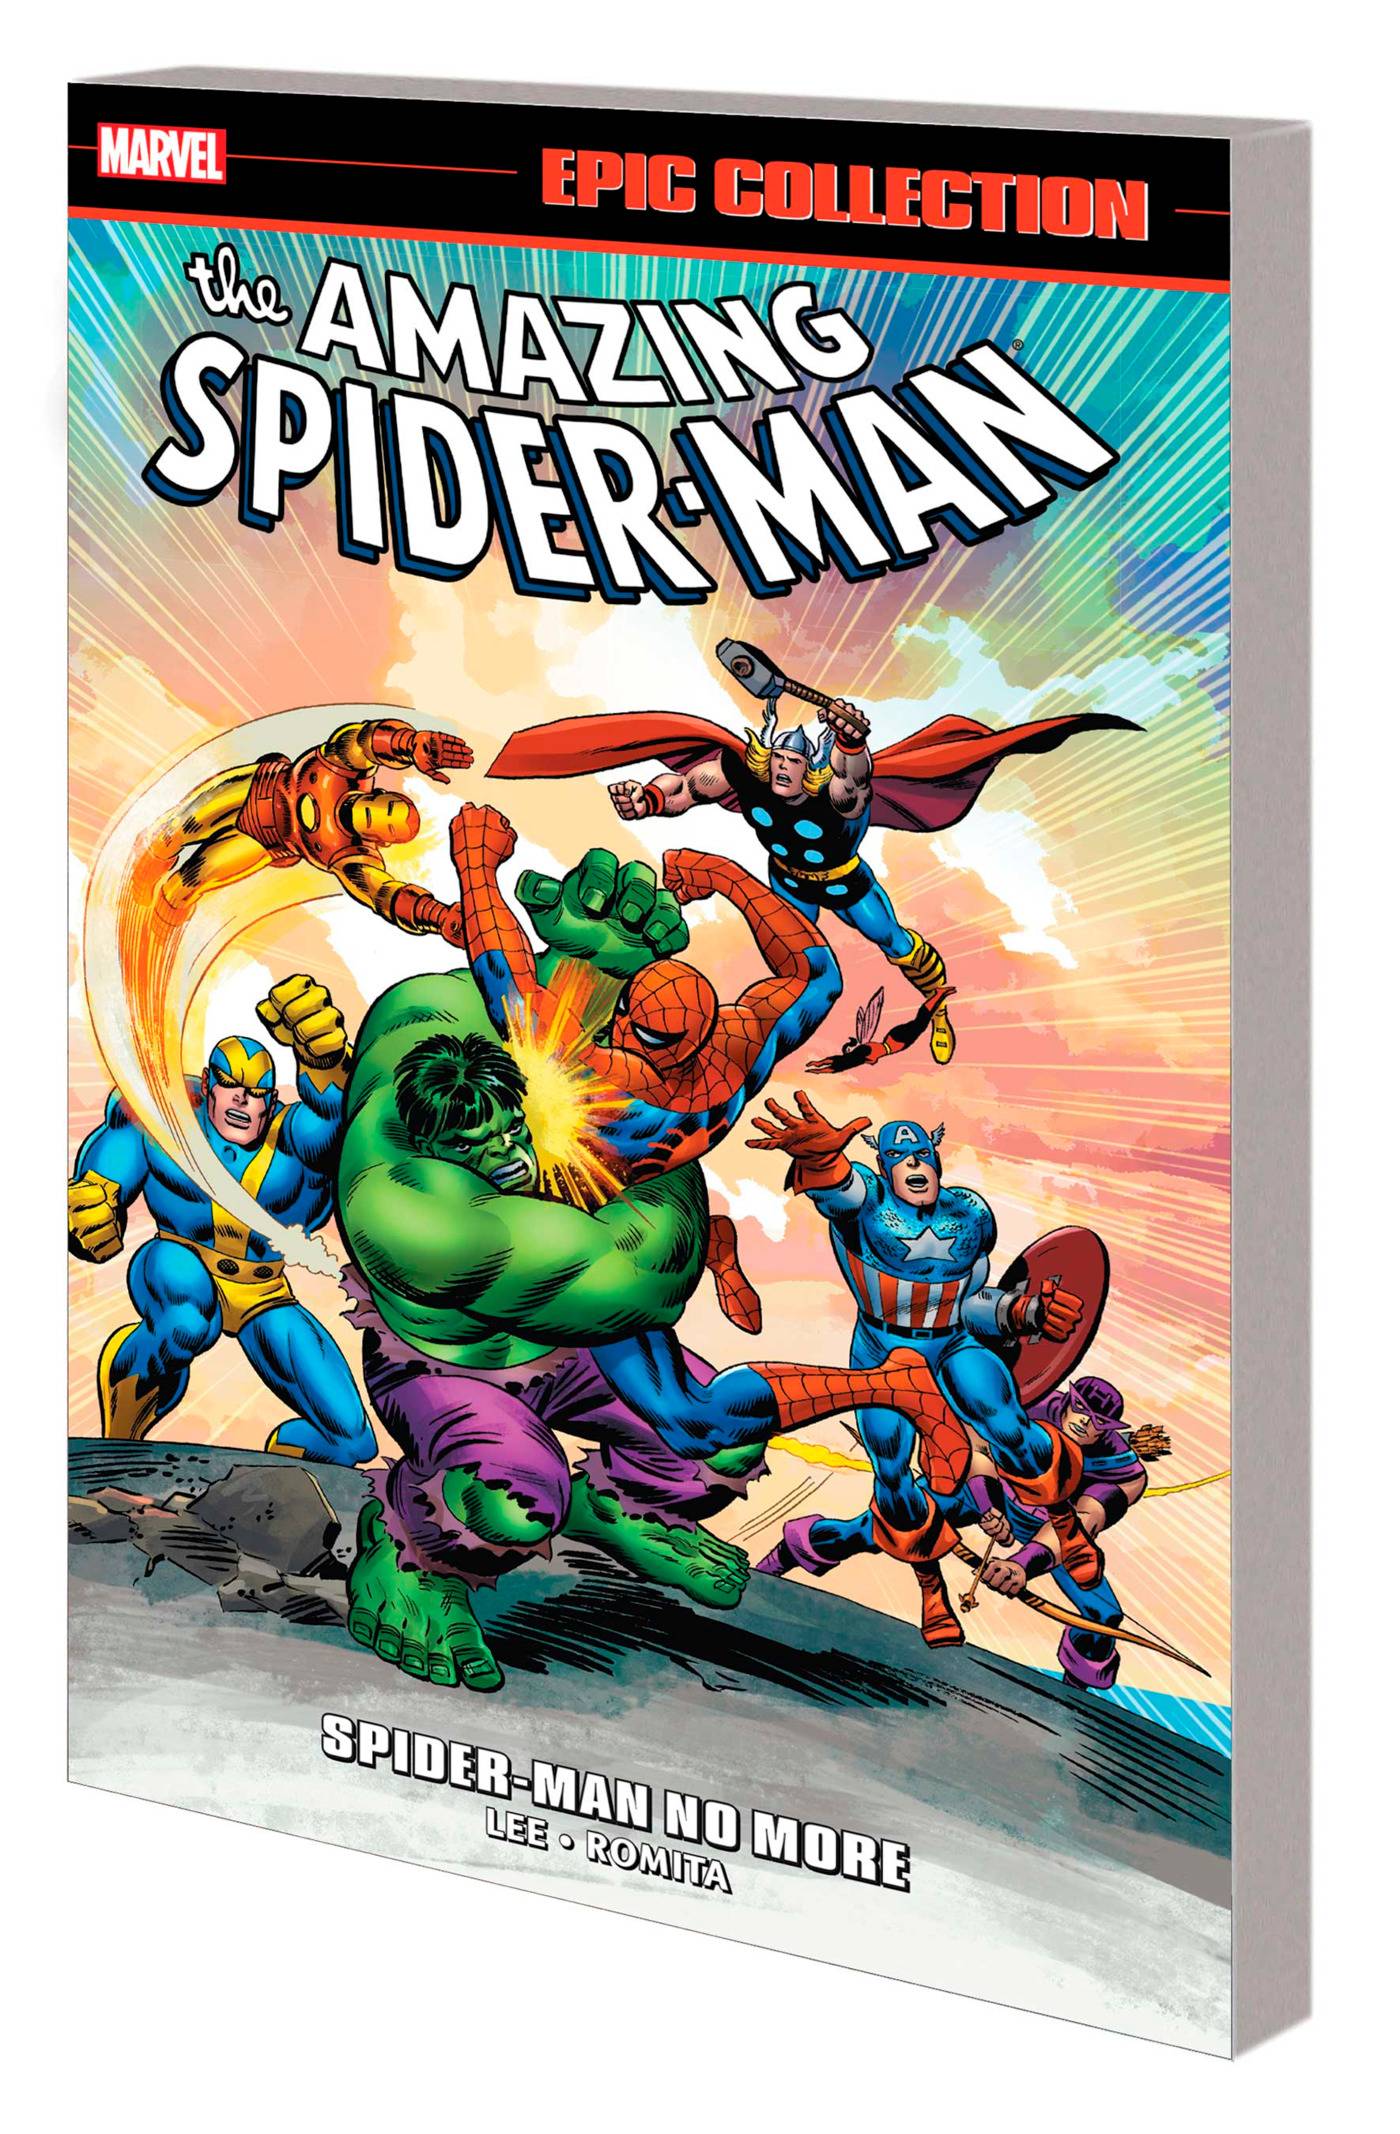 AMAZING SPIDER-MAN EPIC COLLECTION TP 03 SPIDER-MAN NO MORE